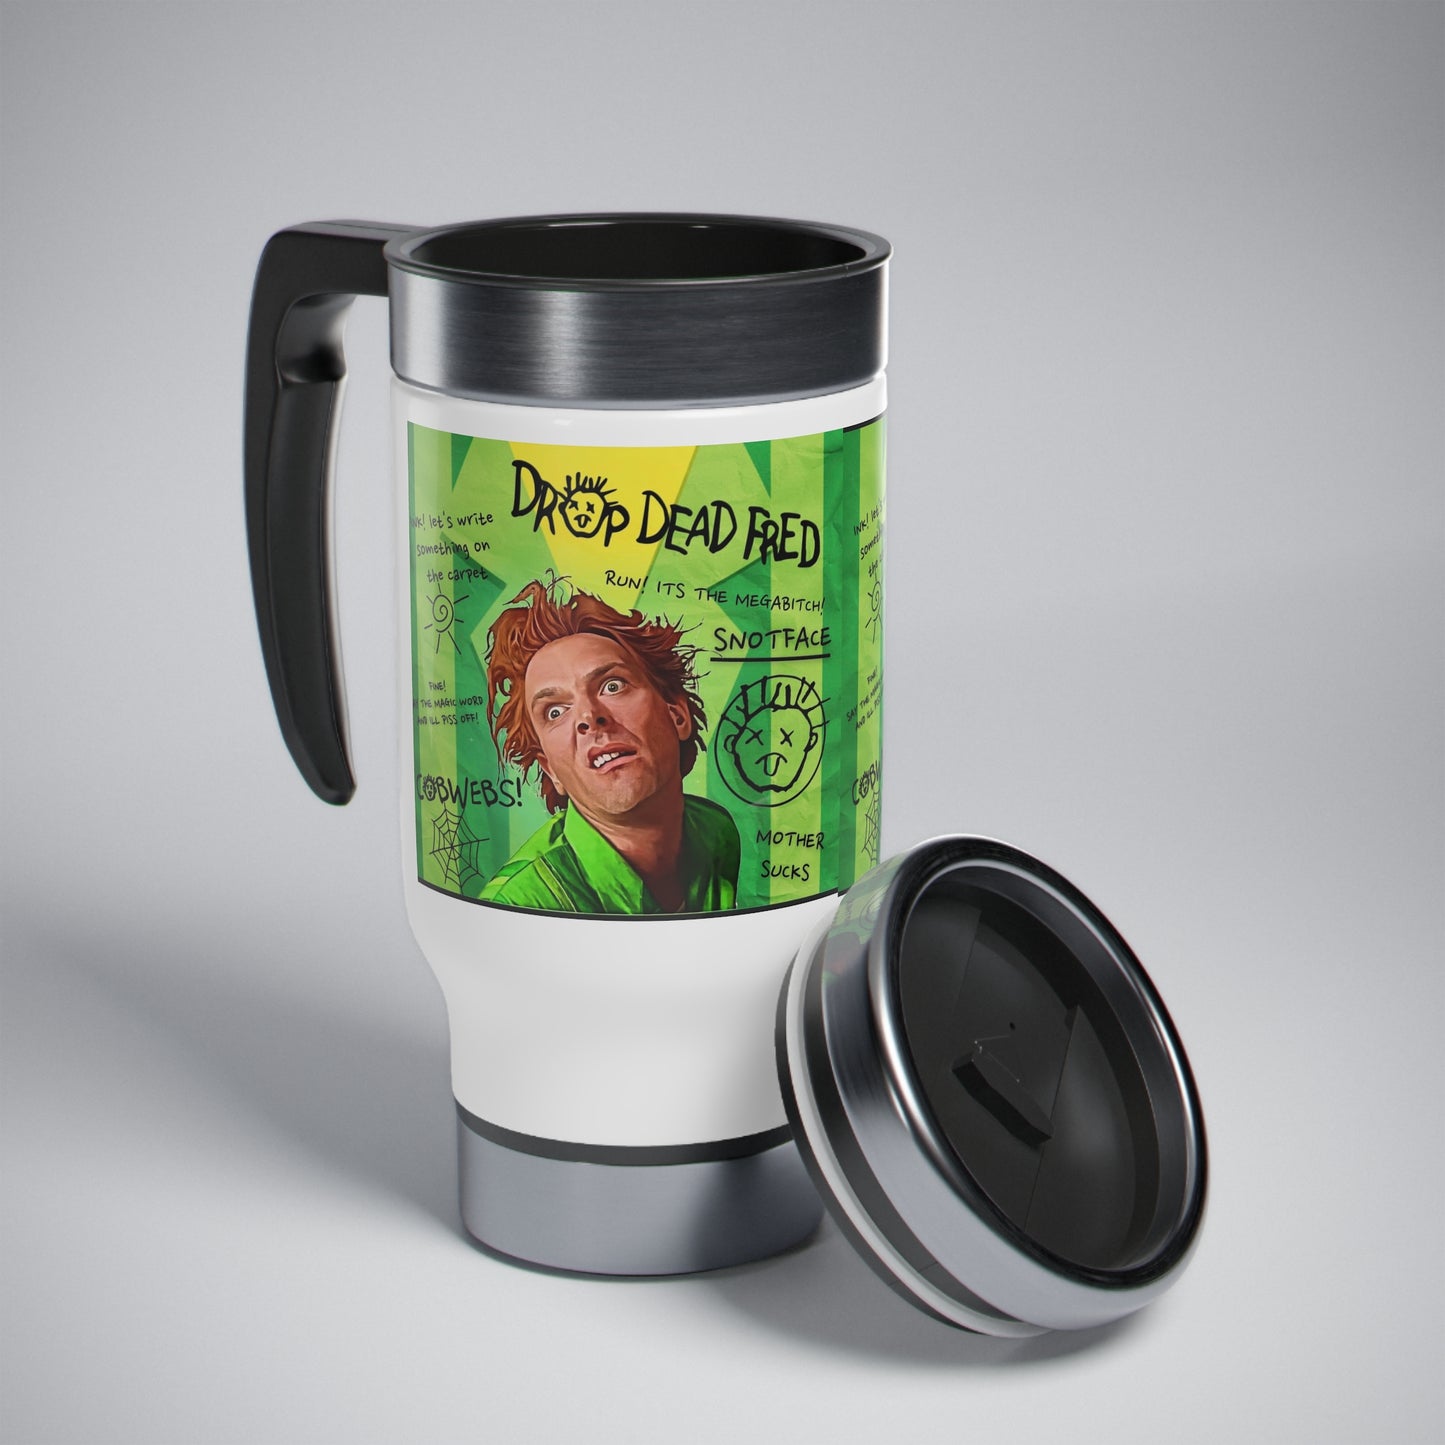 Drop Dead Fred Stainless Steel Travel Mug with Handle, 14oz